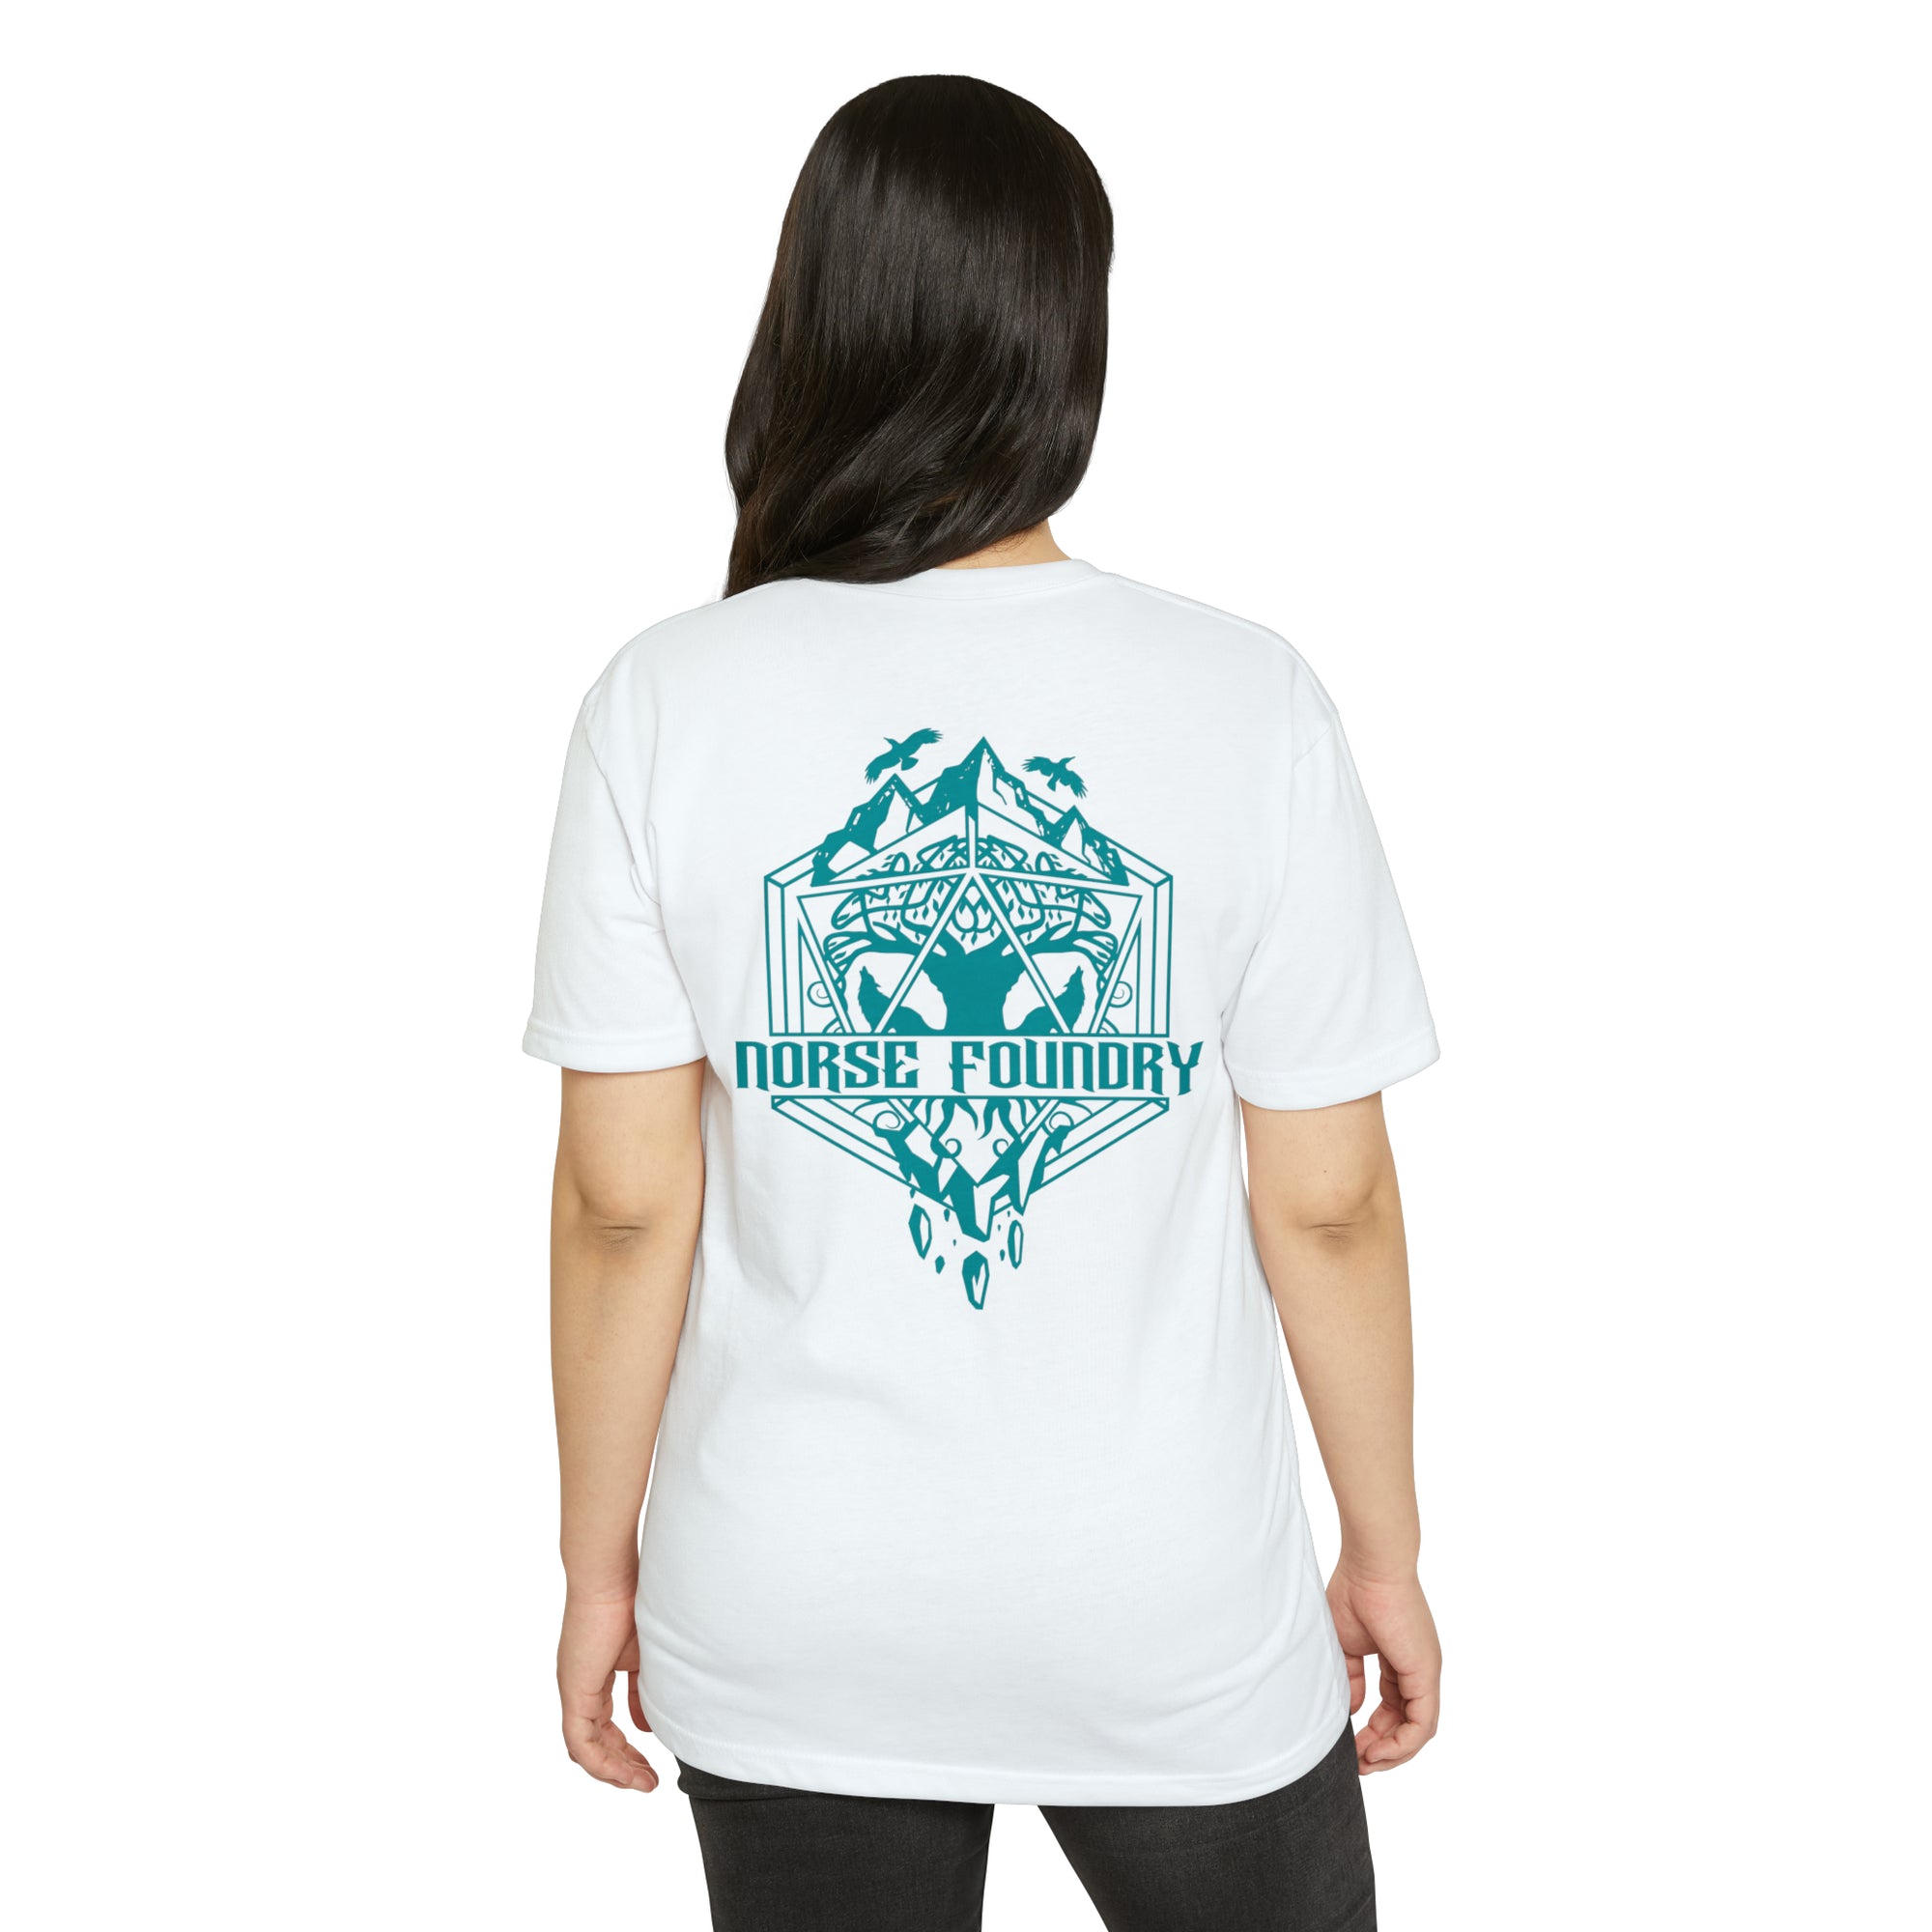 Roll for Adventure Teal -  Norse Foundry T-Shirt